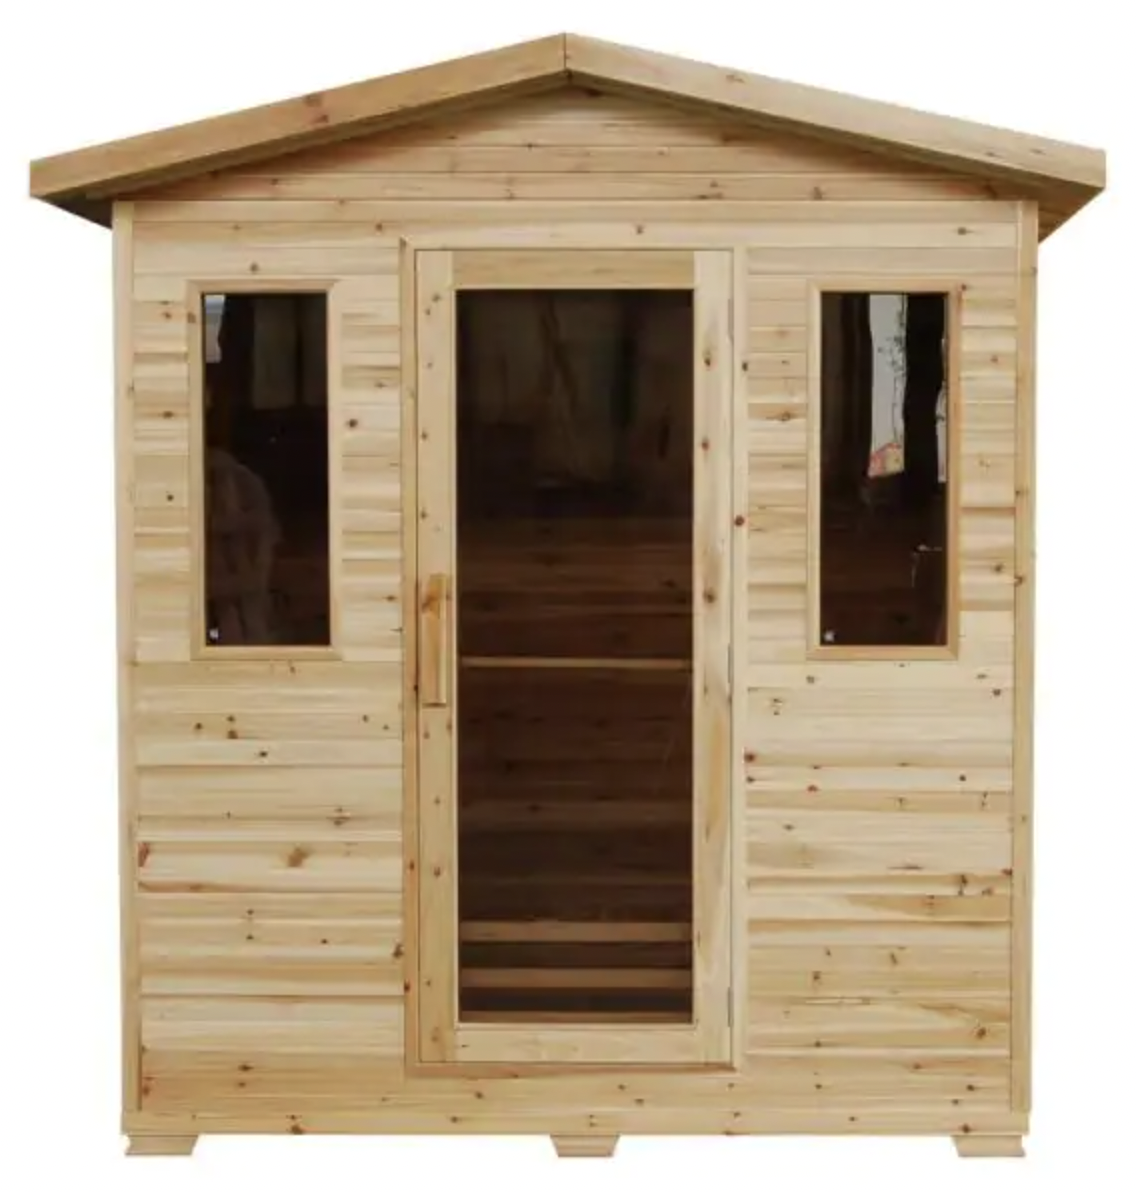 03 The Compact Design - In the event you’re lacking a ton of extra space, your best bet for a compact design is this 3-person design available at Home Depot. Made from natural Canadian hemlock wood, it’s durable and attractive - a welcome addition to yards of any size.